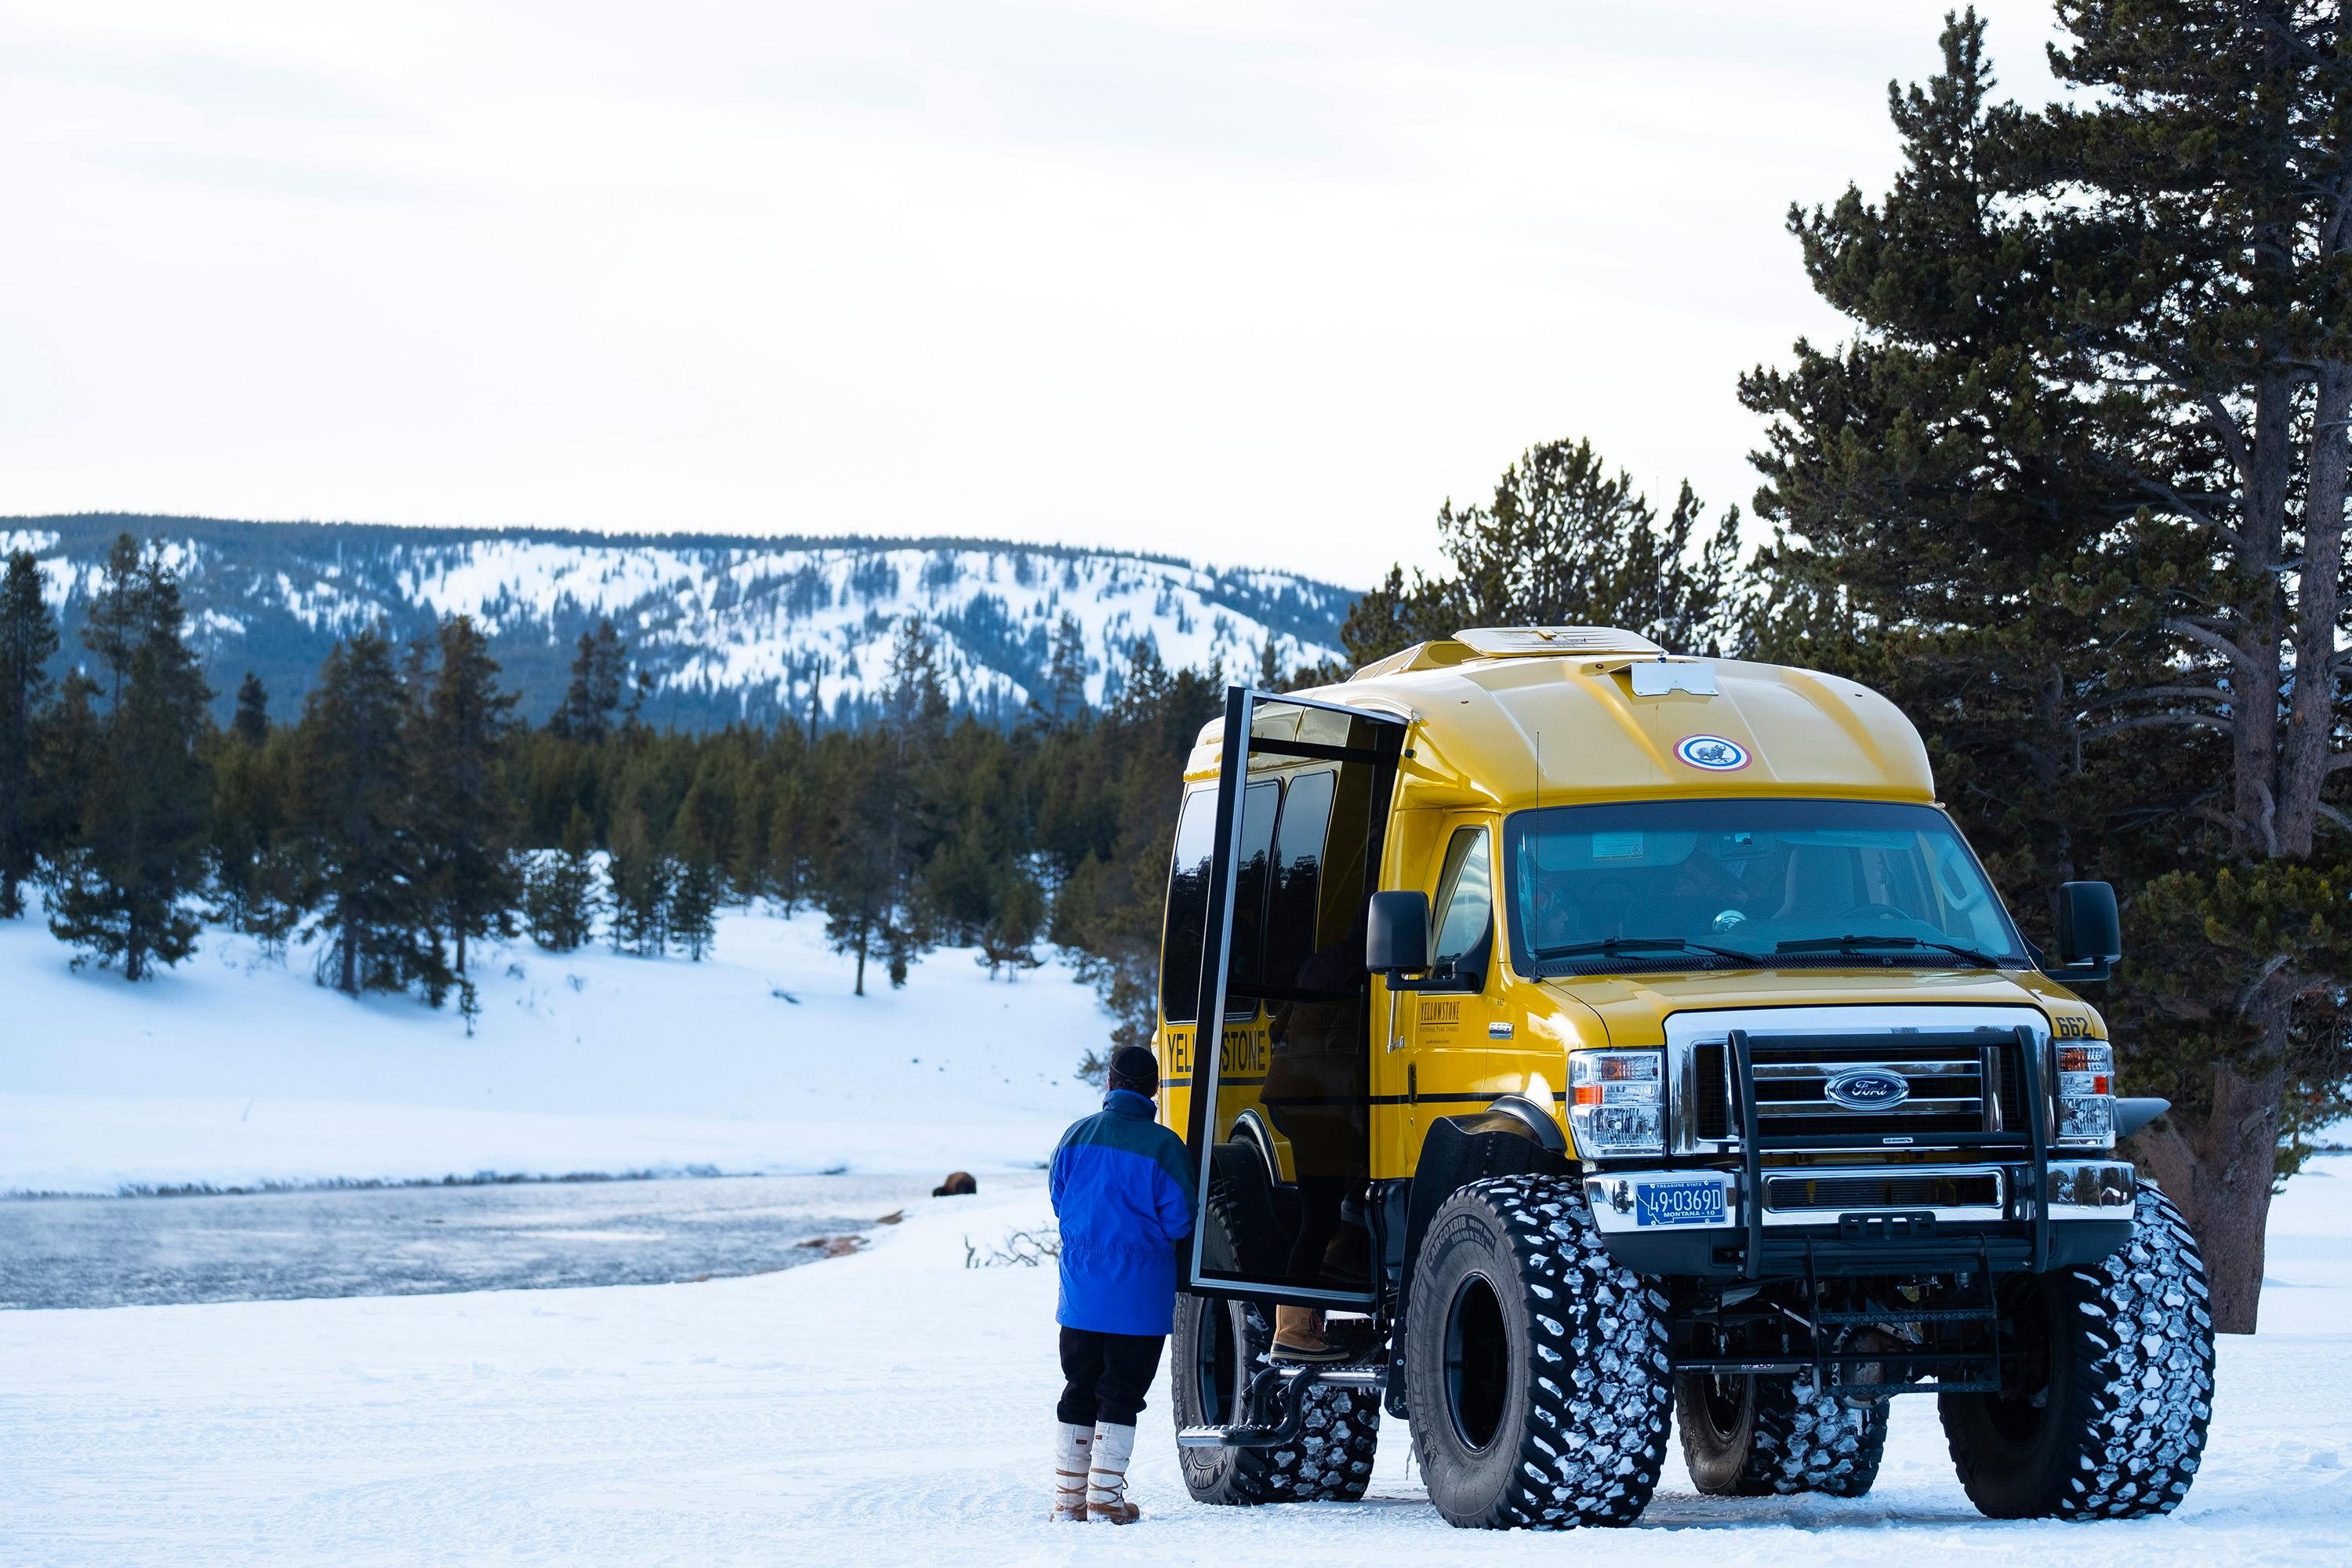 Preparing for a wilderness tour via snowcoach in Yellowstone National Park.